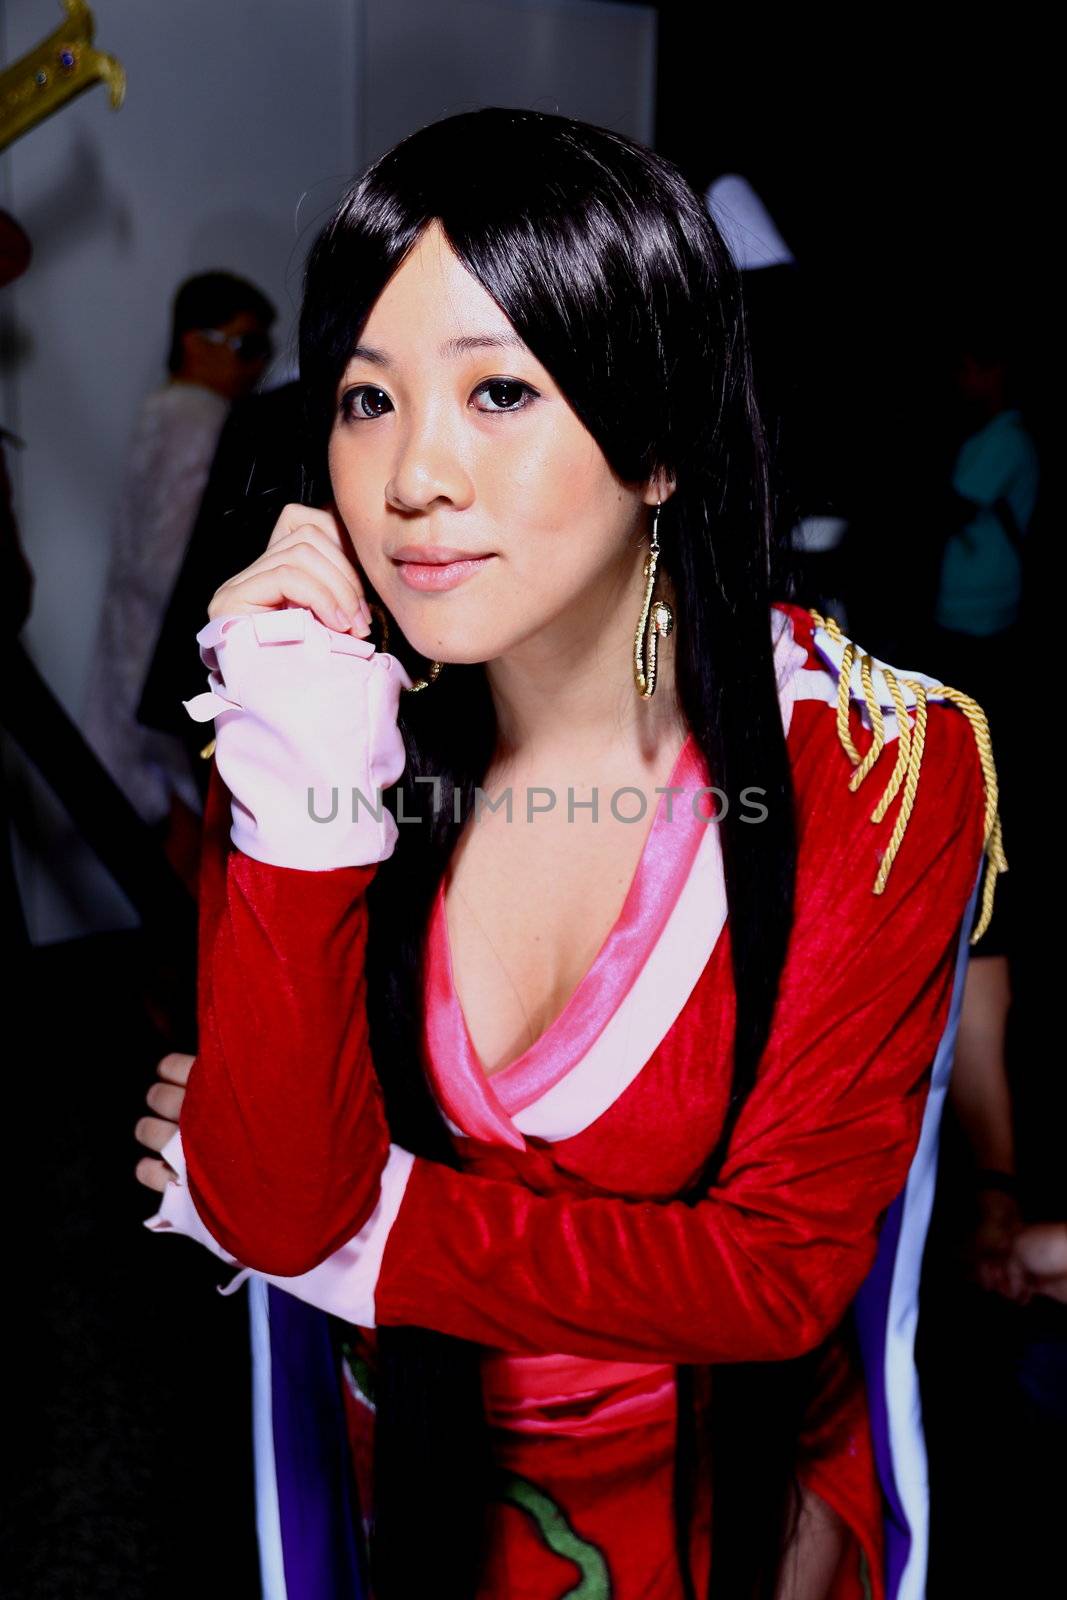 Asian cosplayer by naruto4836